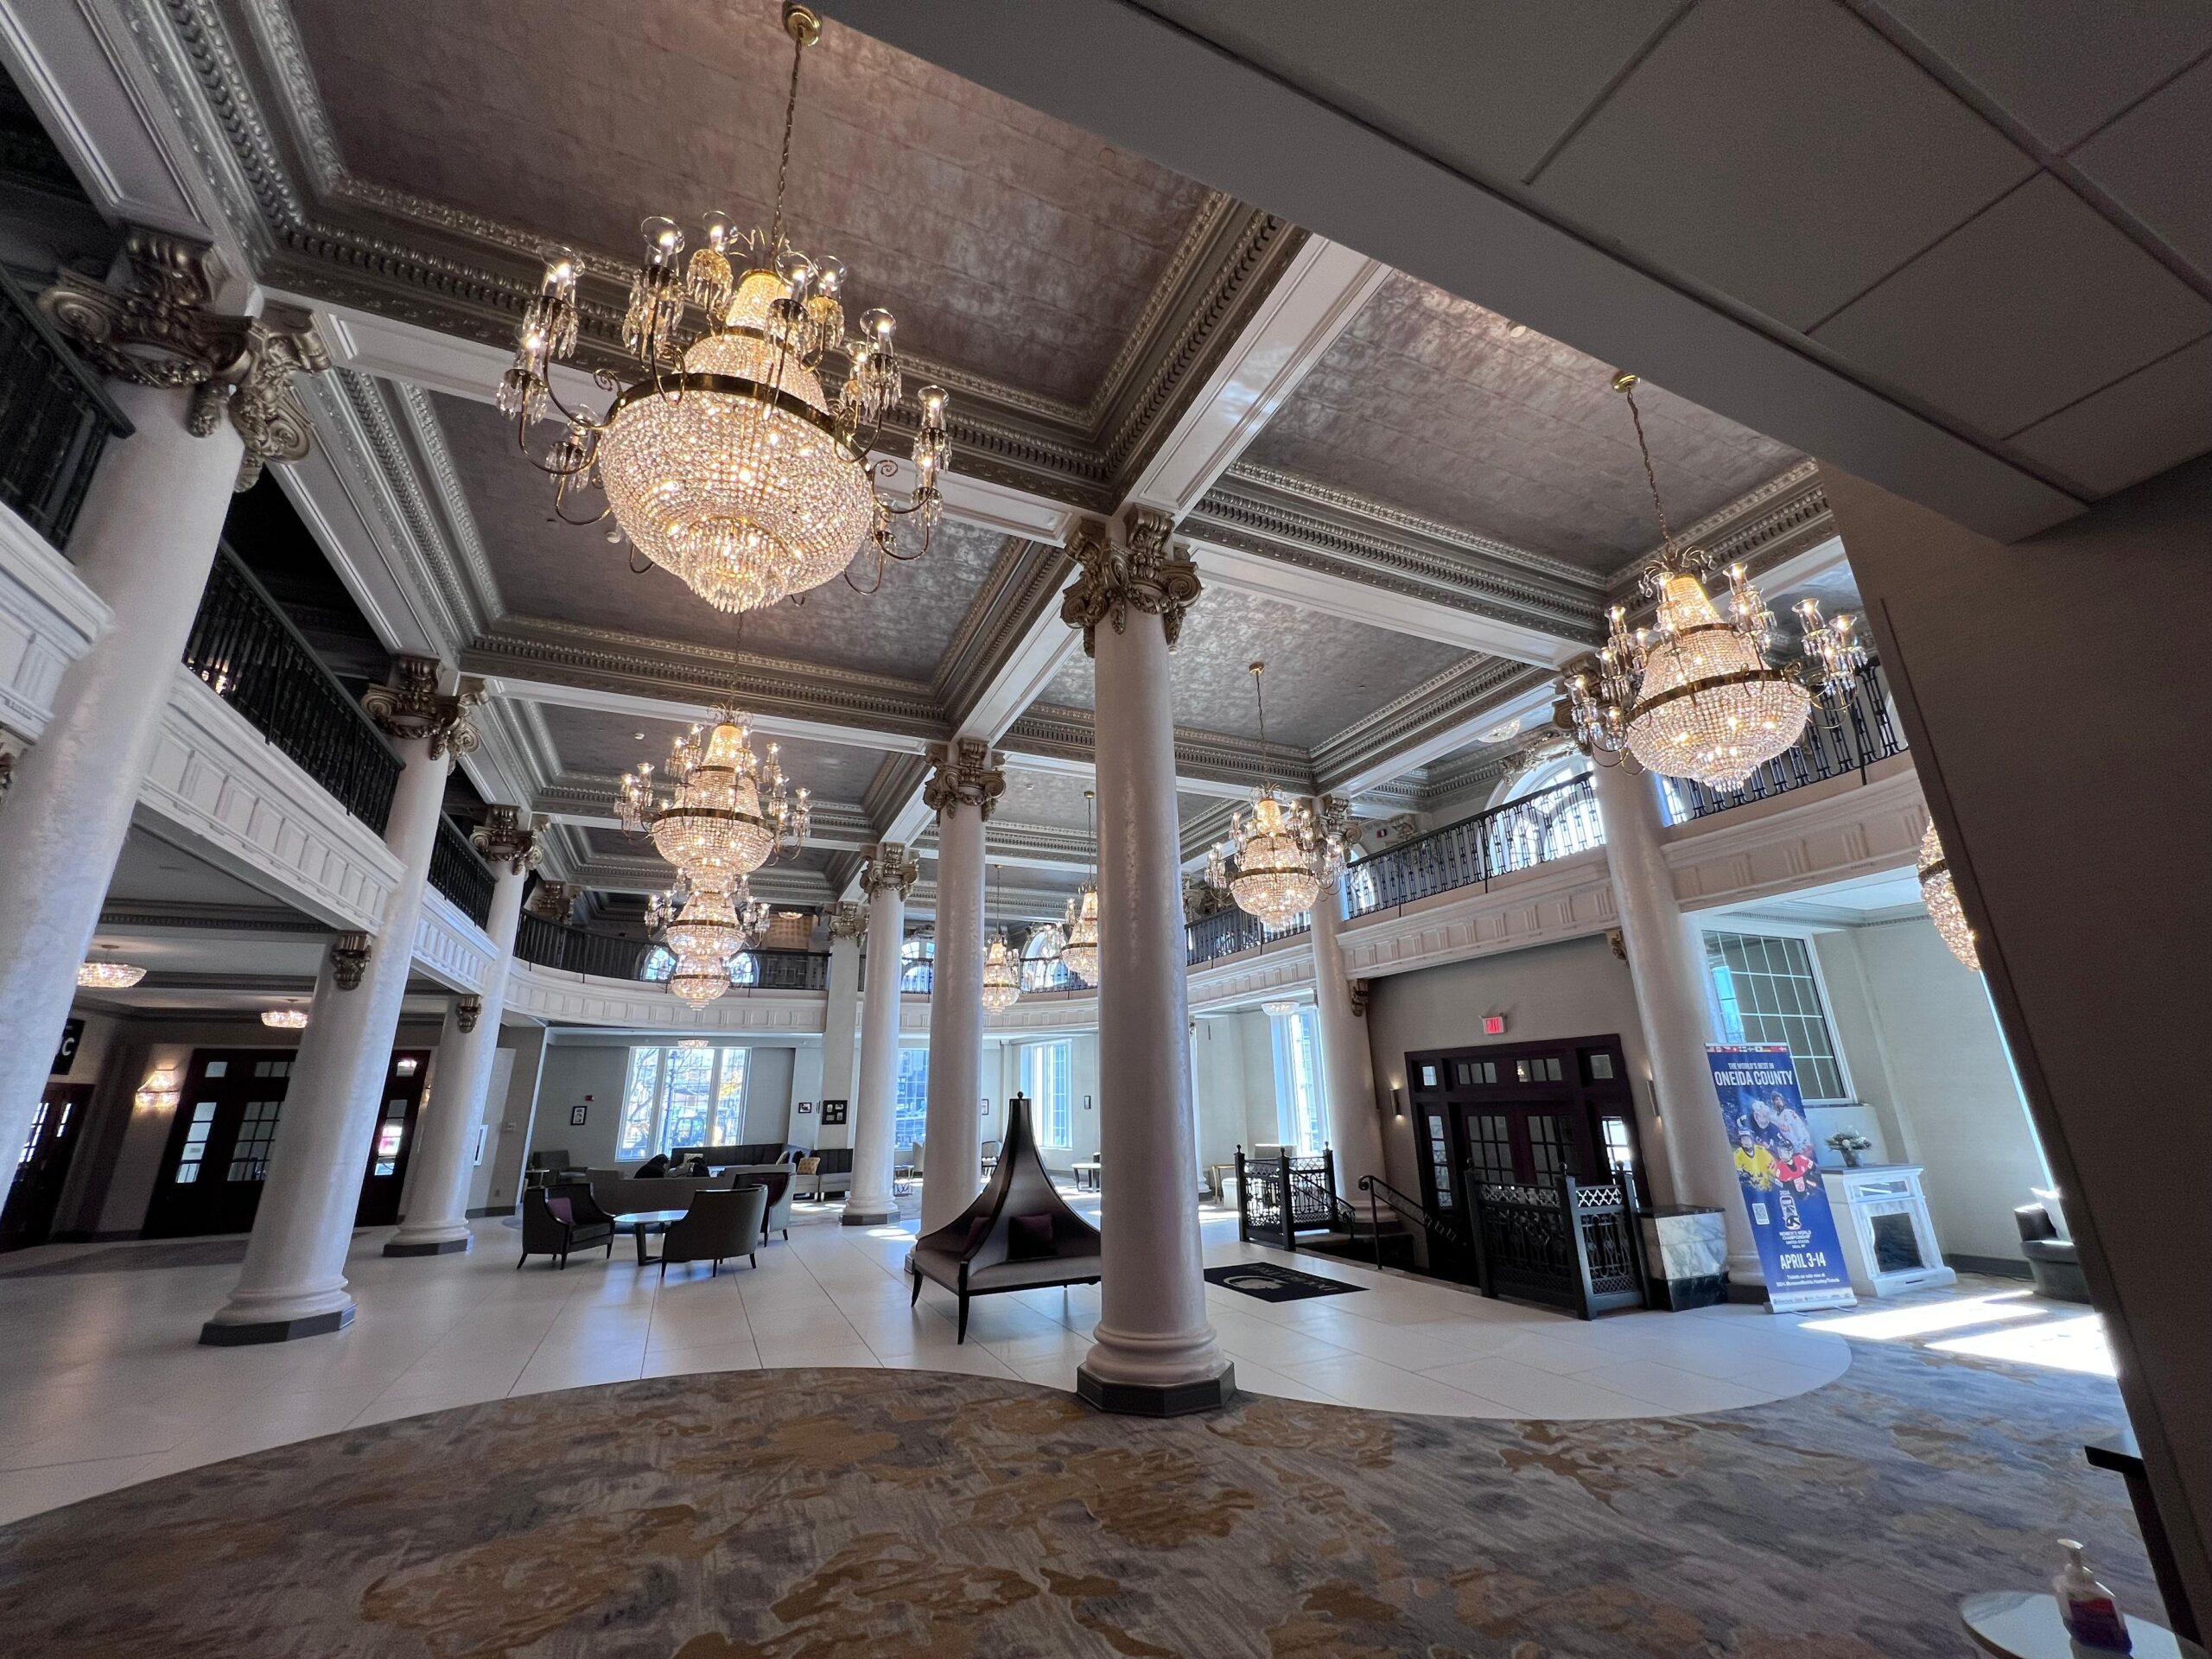 A large room with columns and chandeliers cleaned by Clarkes Service Professionals